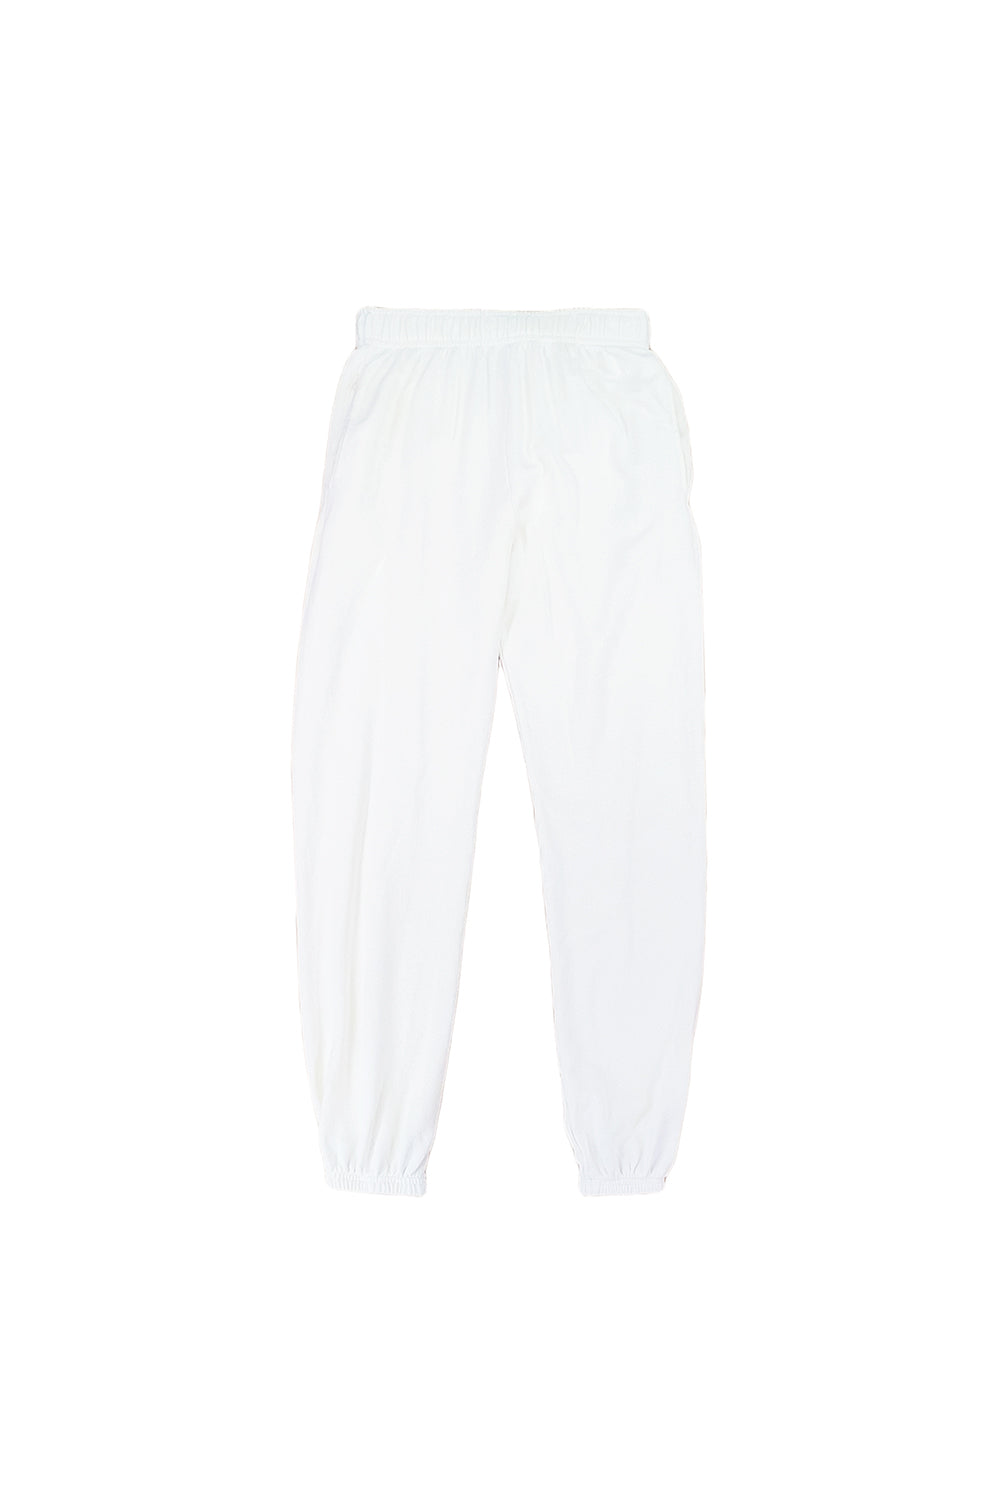 Classic Sweatpant | Jungmaven Hemp Clothing & Accessories / Color: Washed White